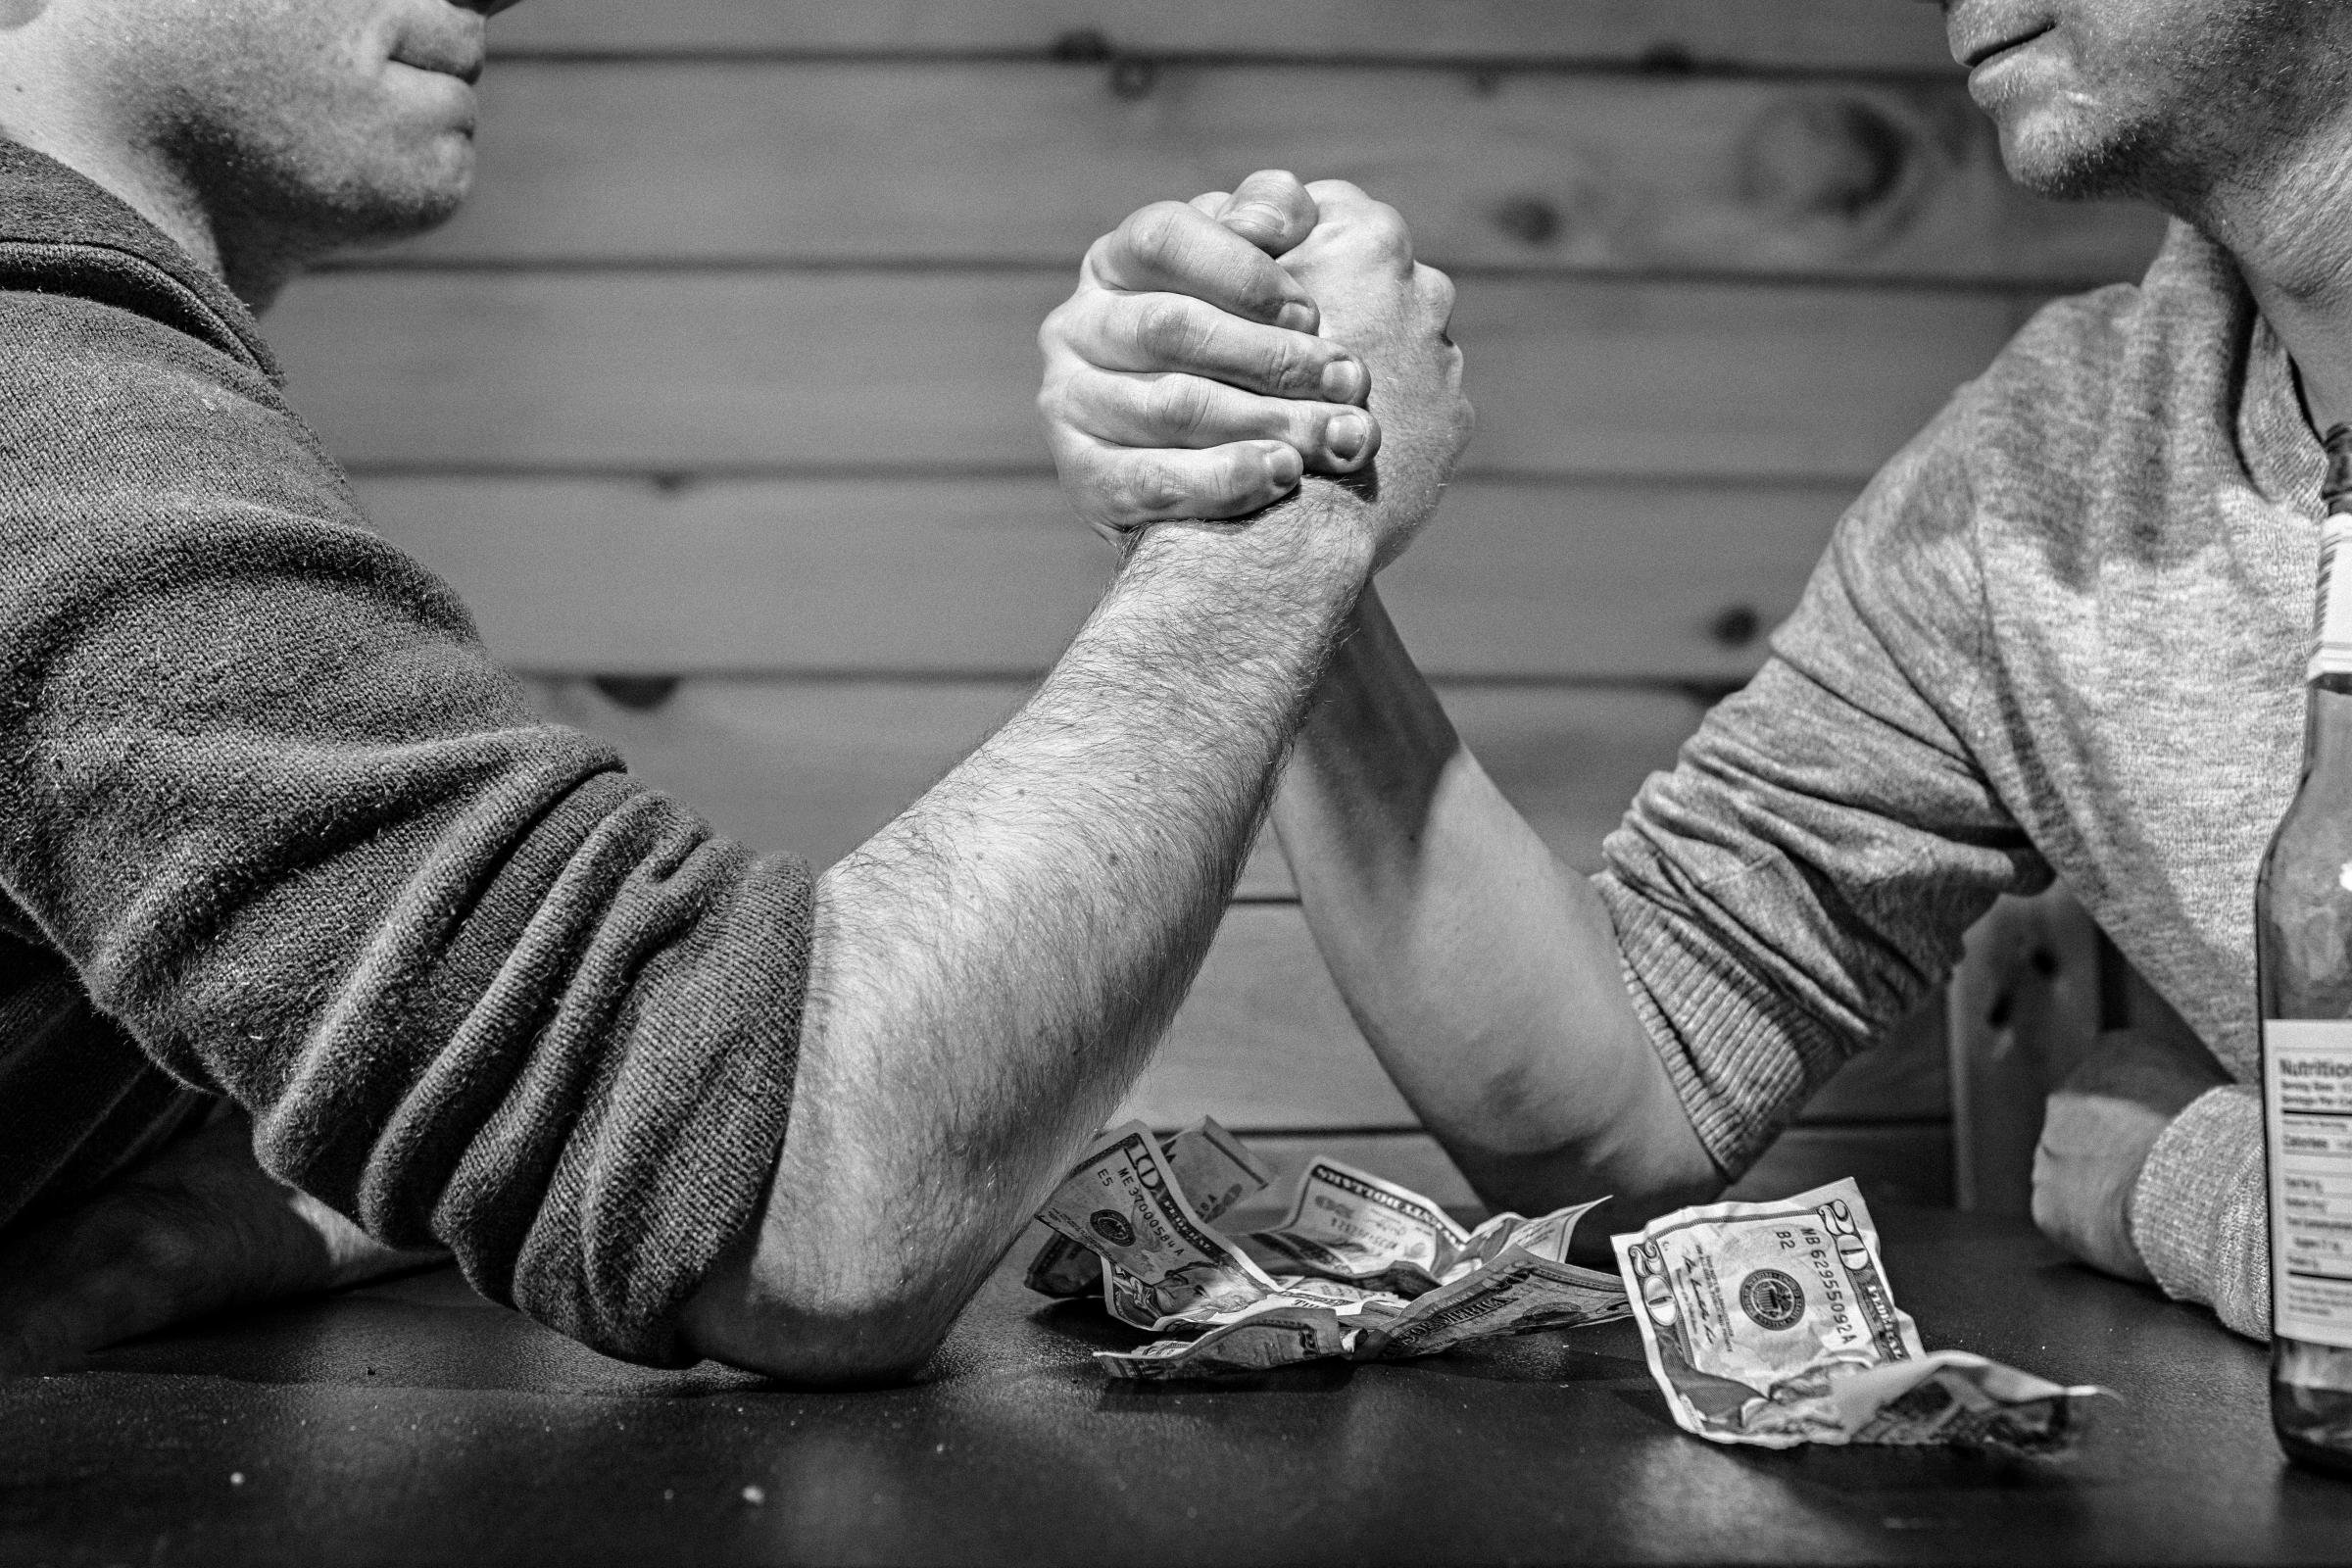 Brett believes his dream about arm wrestling Phillip Schofield may have been brought on by Covid-19. Photo: Pixabay